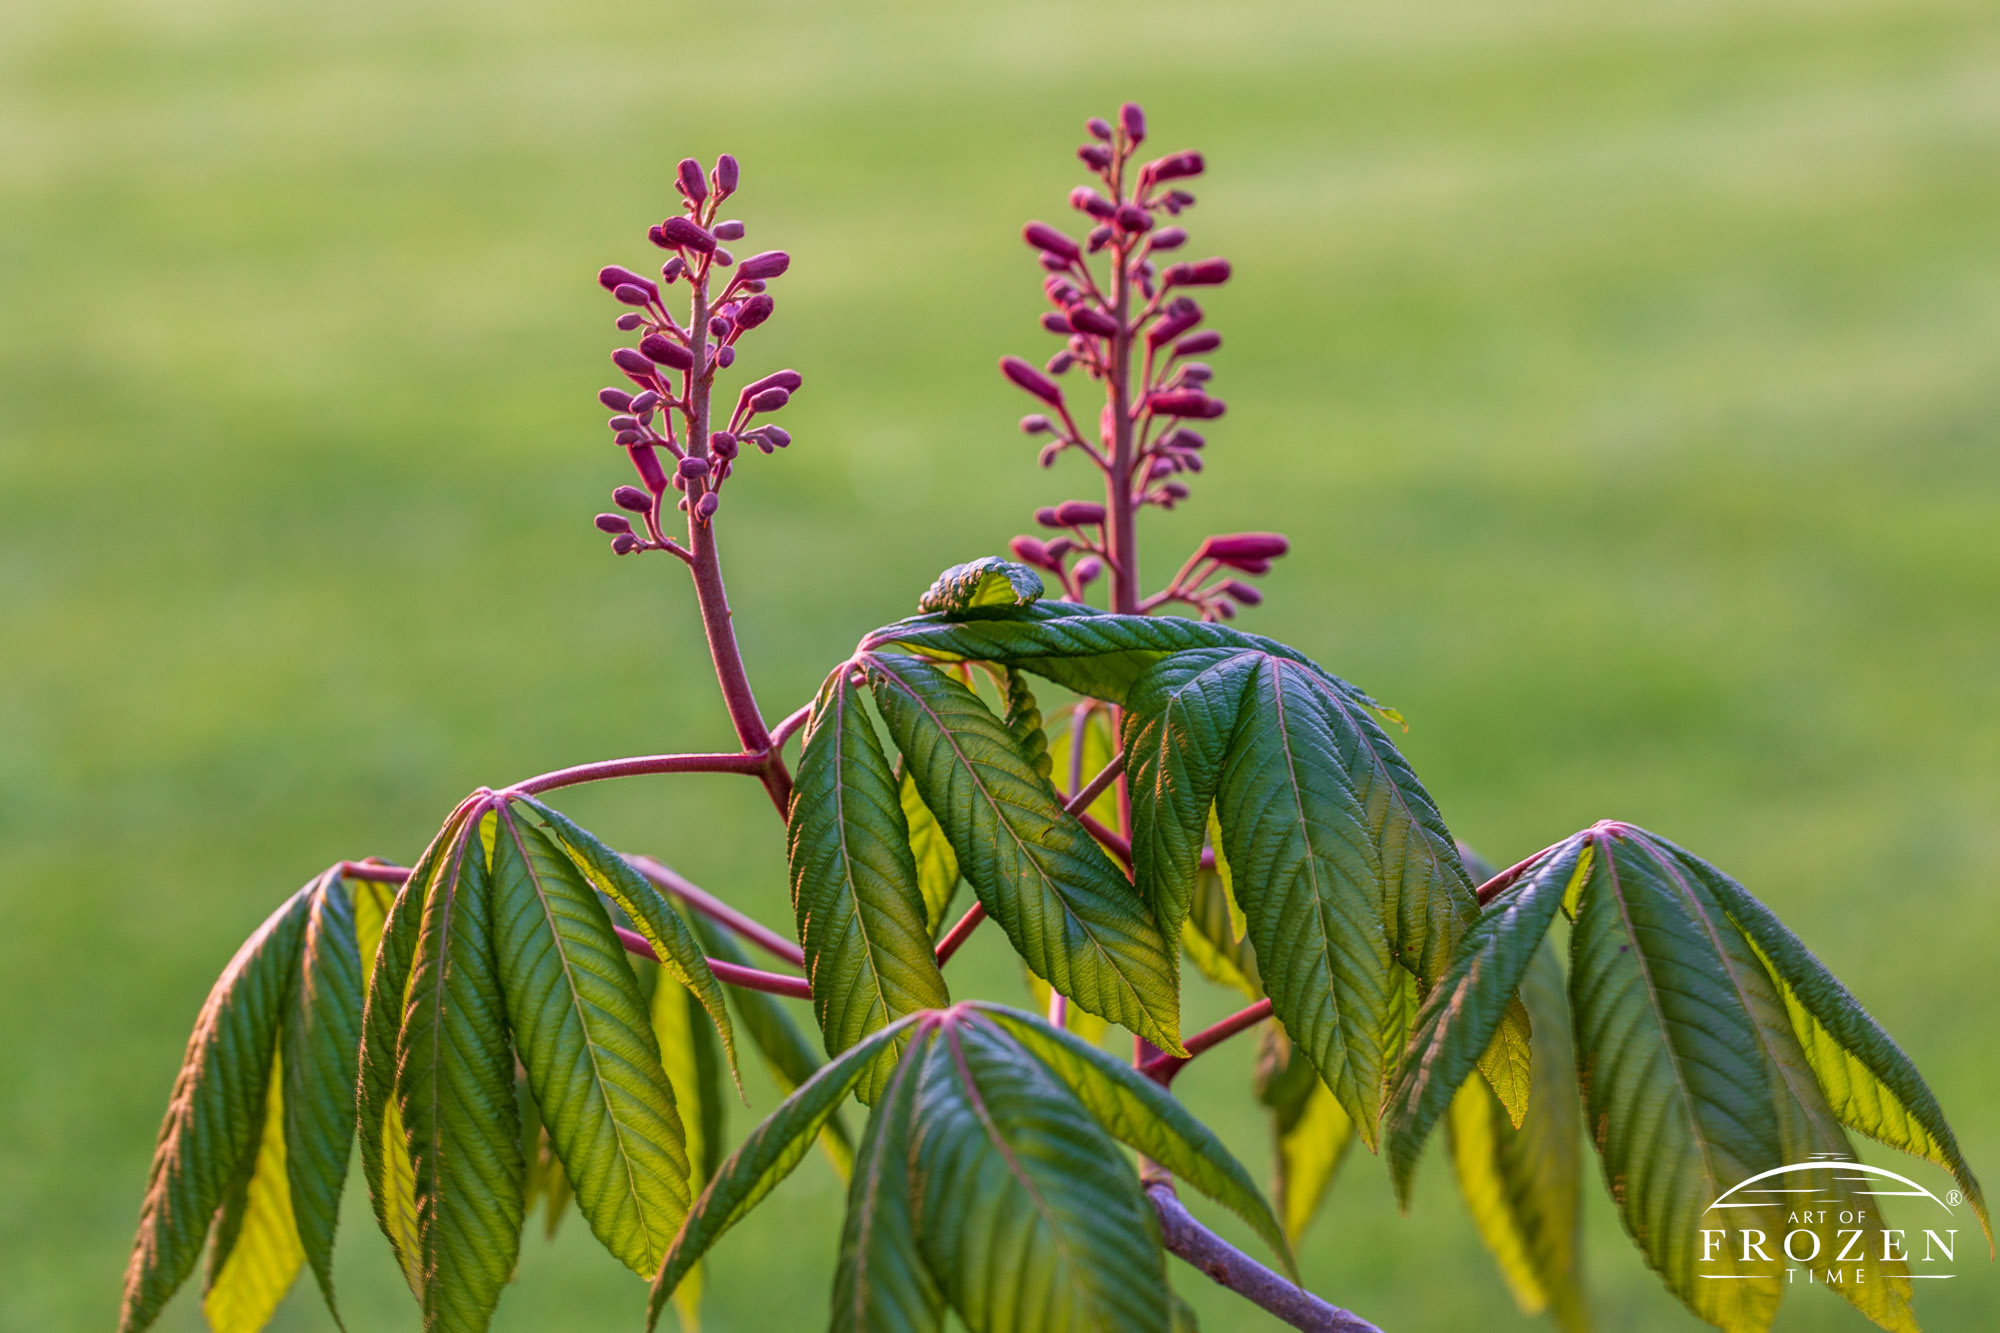 A Red Buckeye tree in early spring where its leaves have not fully formed as well as its flower buds.